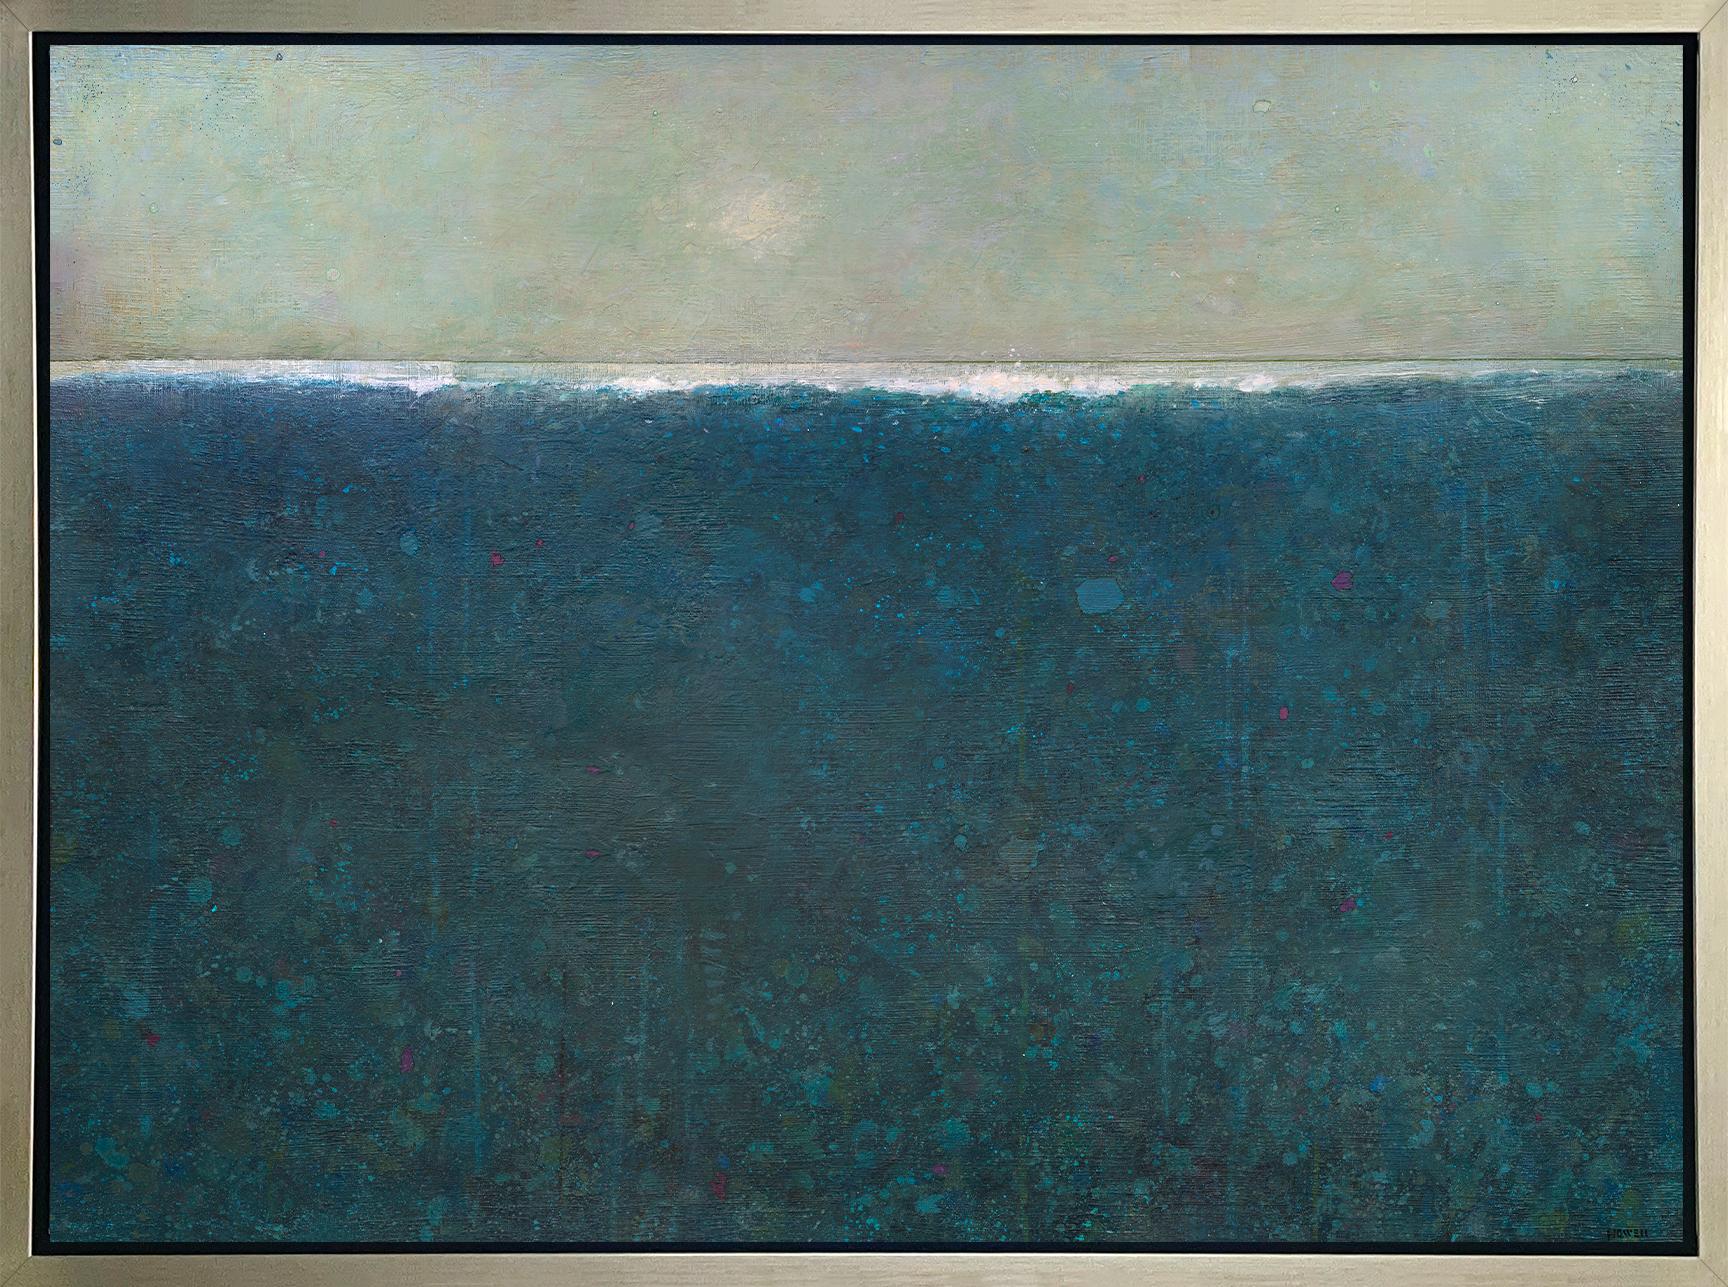 Elwood Howell Abstract Print - "Ocean, " Limited Edition Giclee Print, 45" x 60"